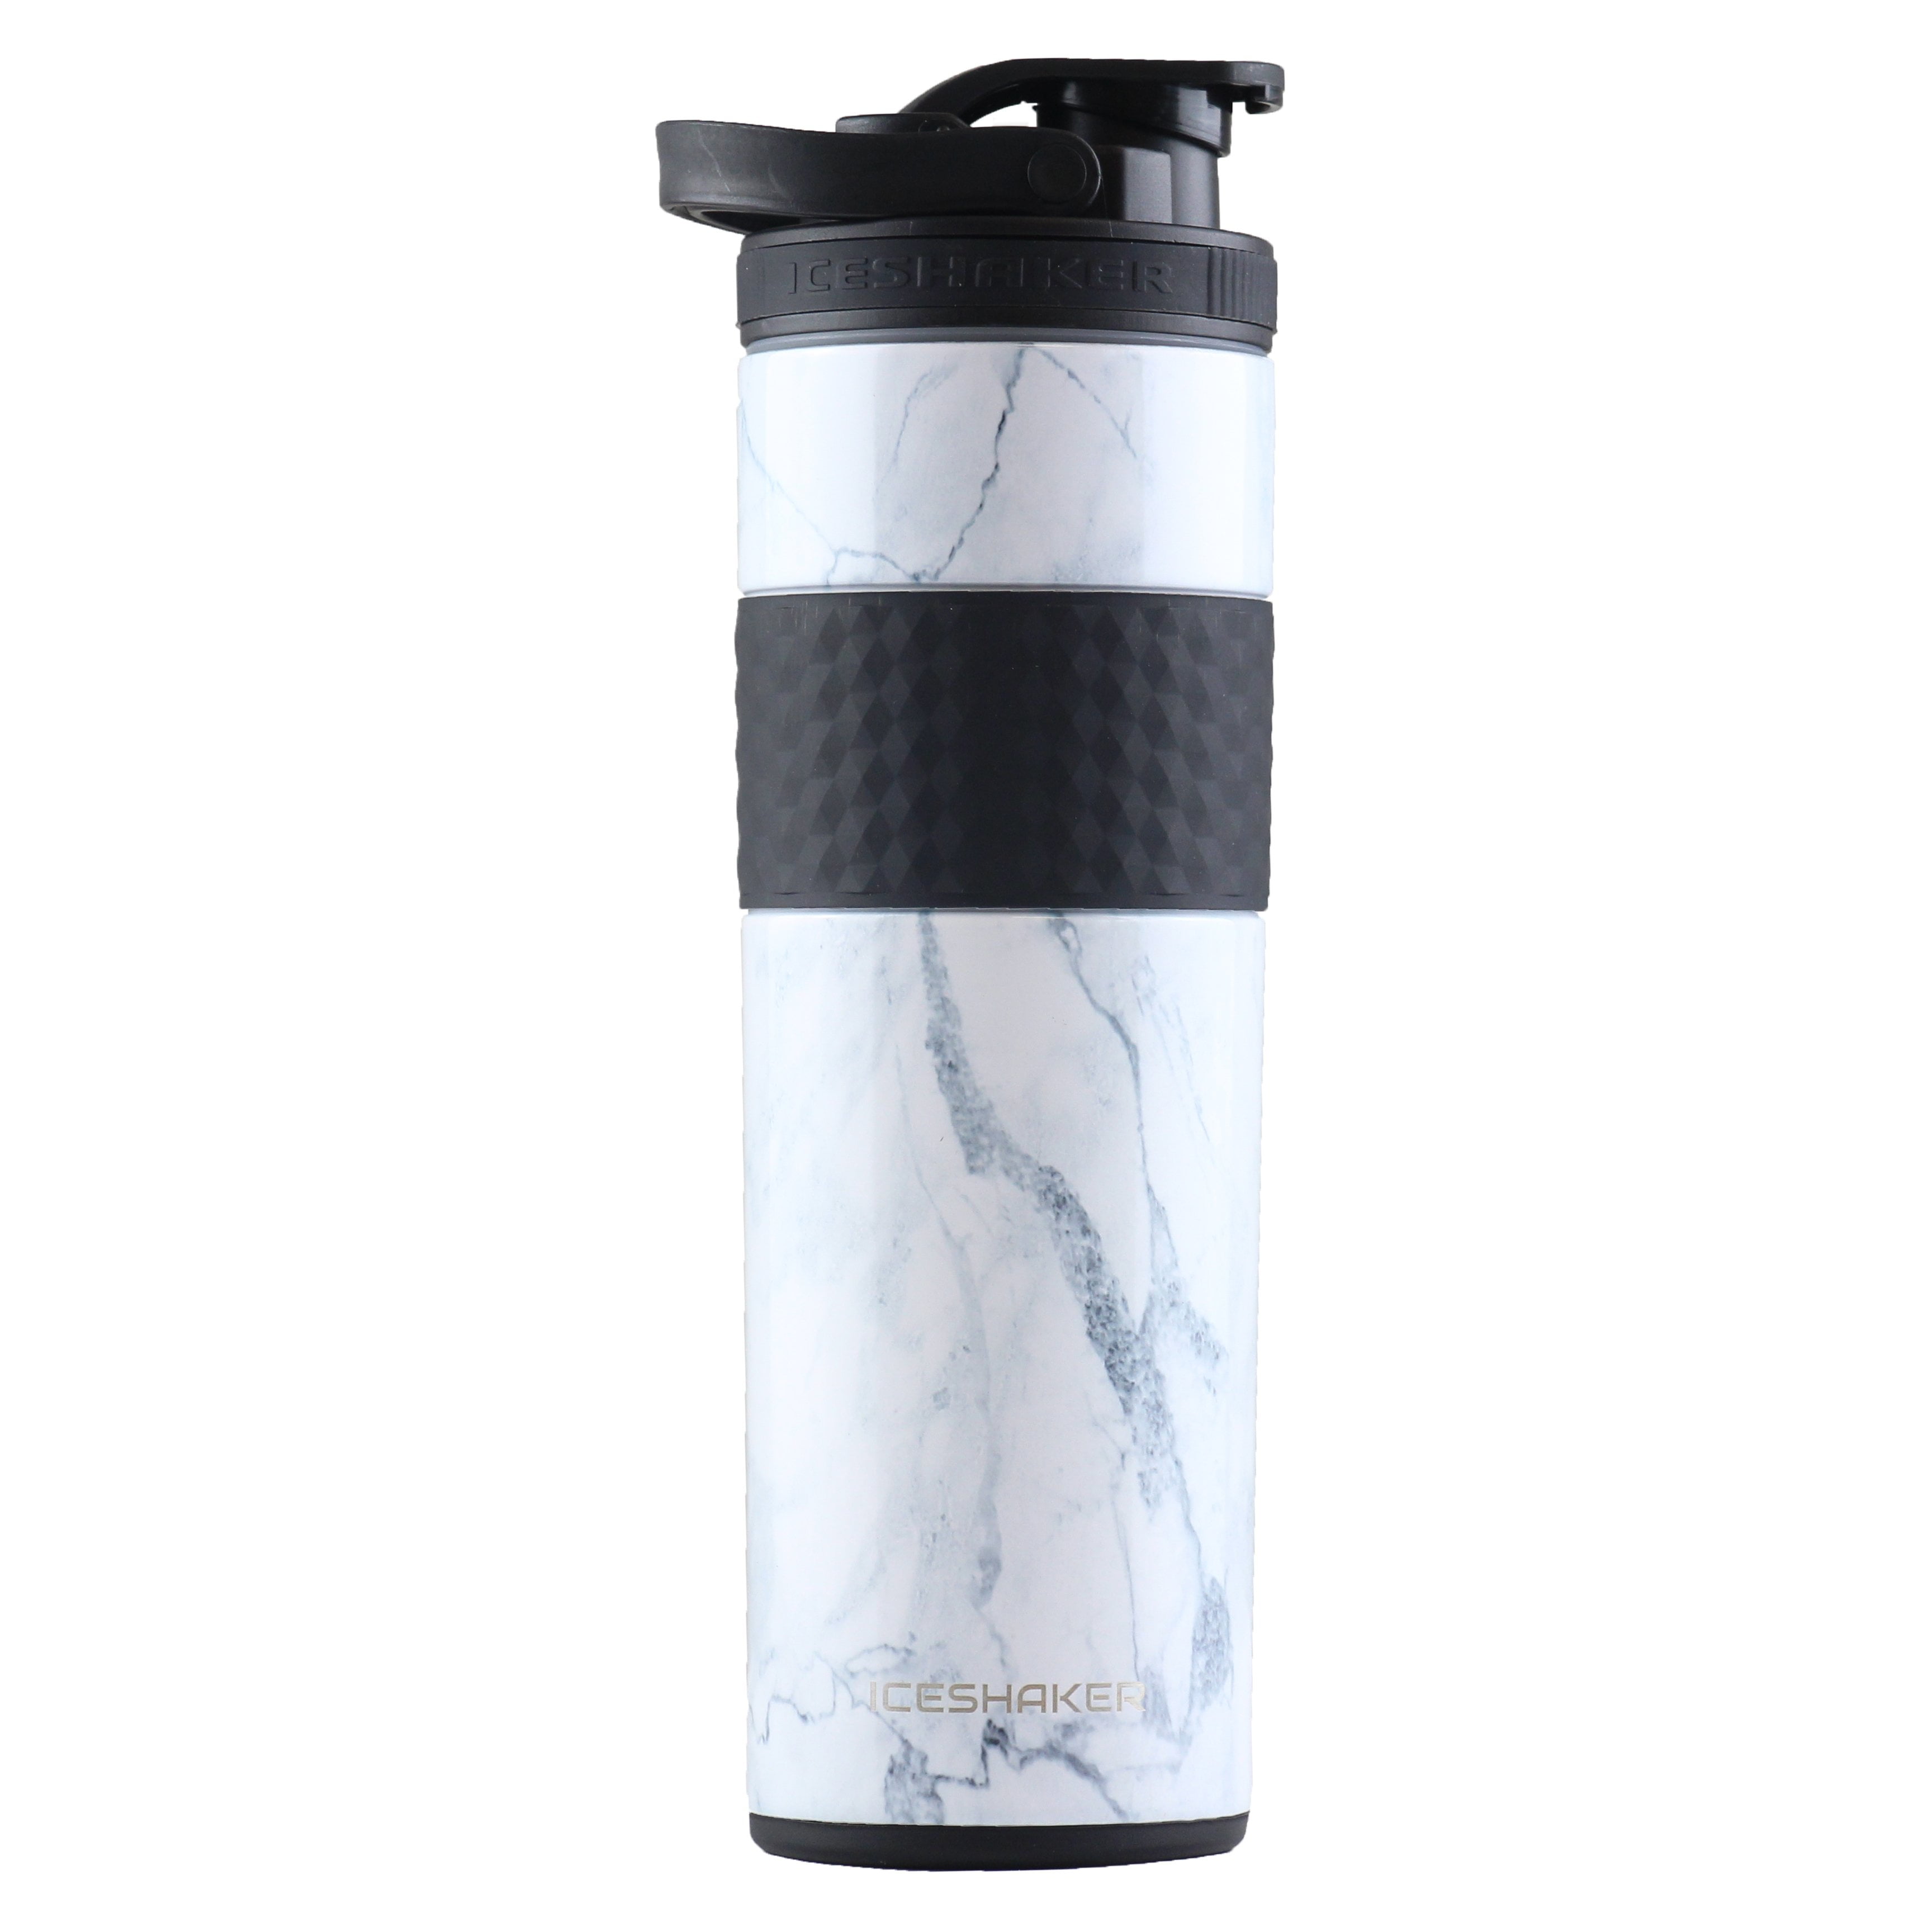 LEOPARD NUTRITION Gym Shaker/Sipper Bottle 400 ml, 100% Leakproof  Guarantee, Ideal for Protein shake, Pre workout and BCAAs, BPA Free  Material (Black Mini Shaker 300ml) 